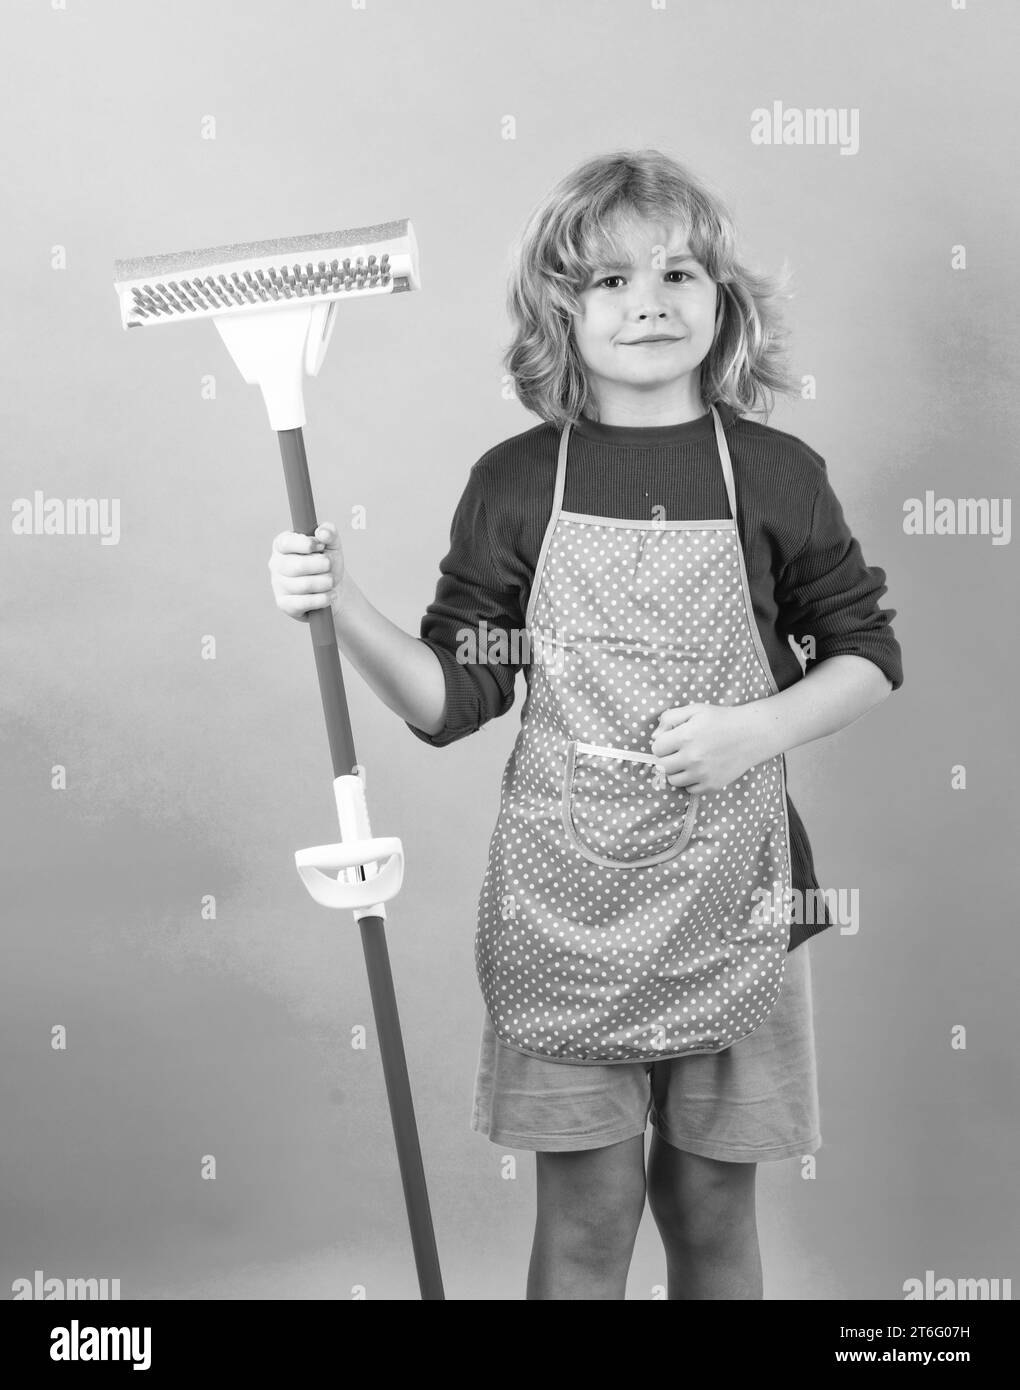 Child doing housework. Portrait of child cleaning, concept growth, development, family relationships. Housekeeping and home cleaning concept. Stock Photo